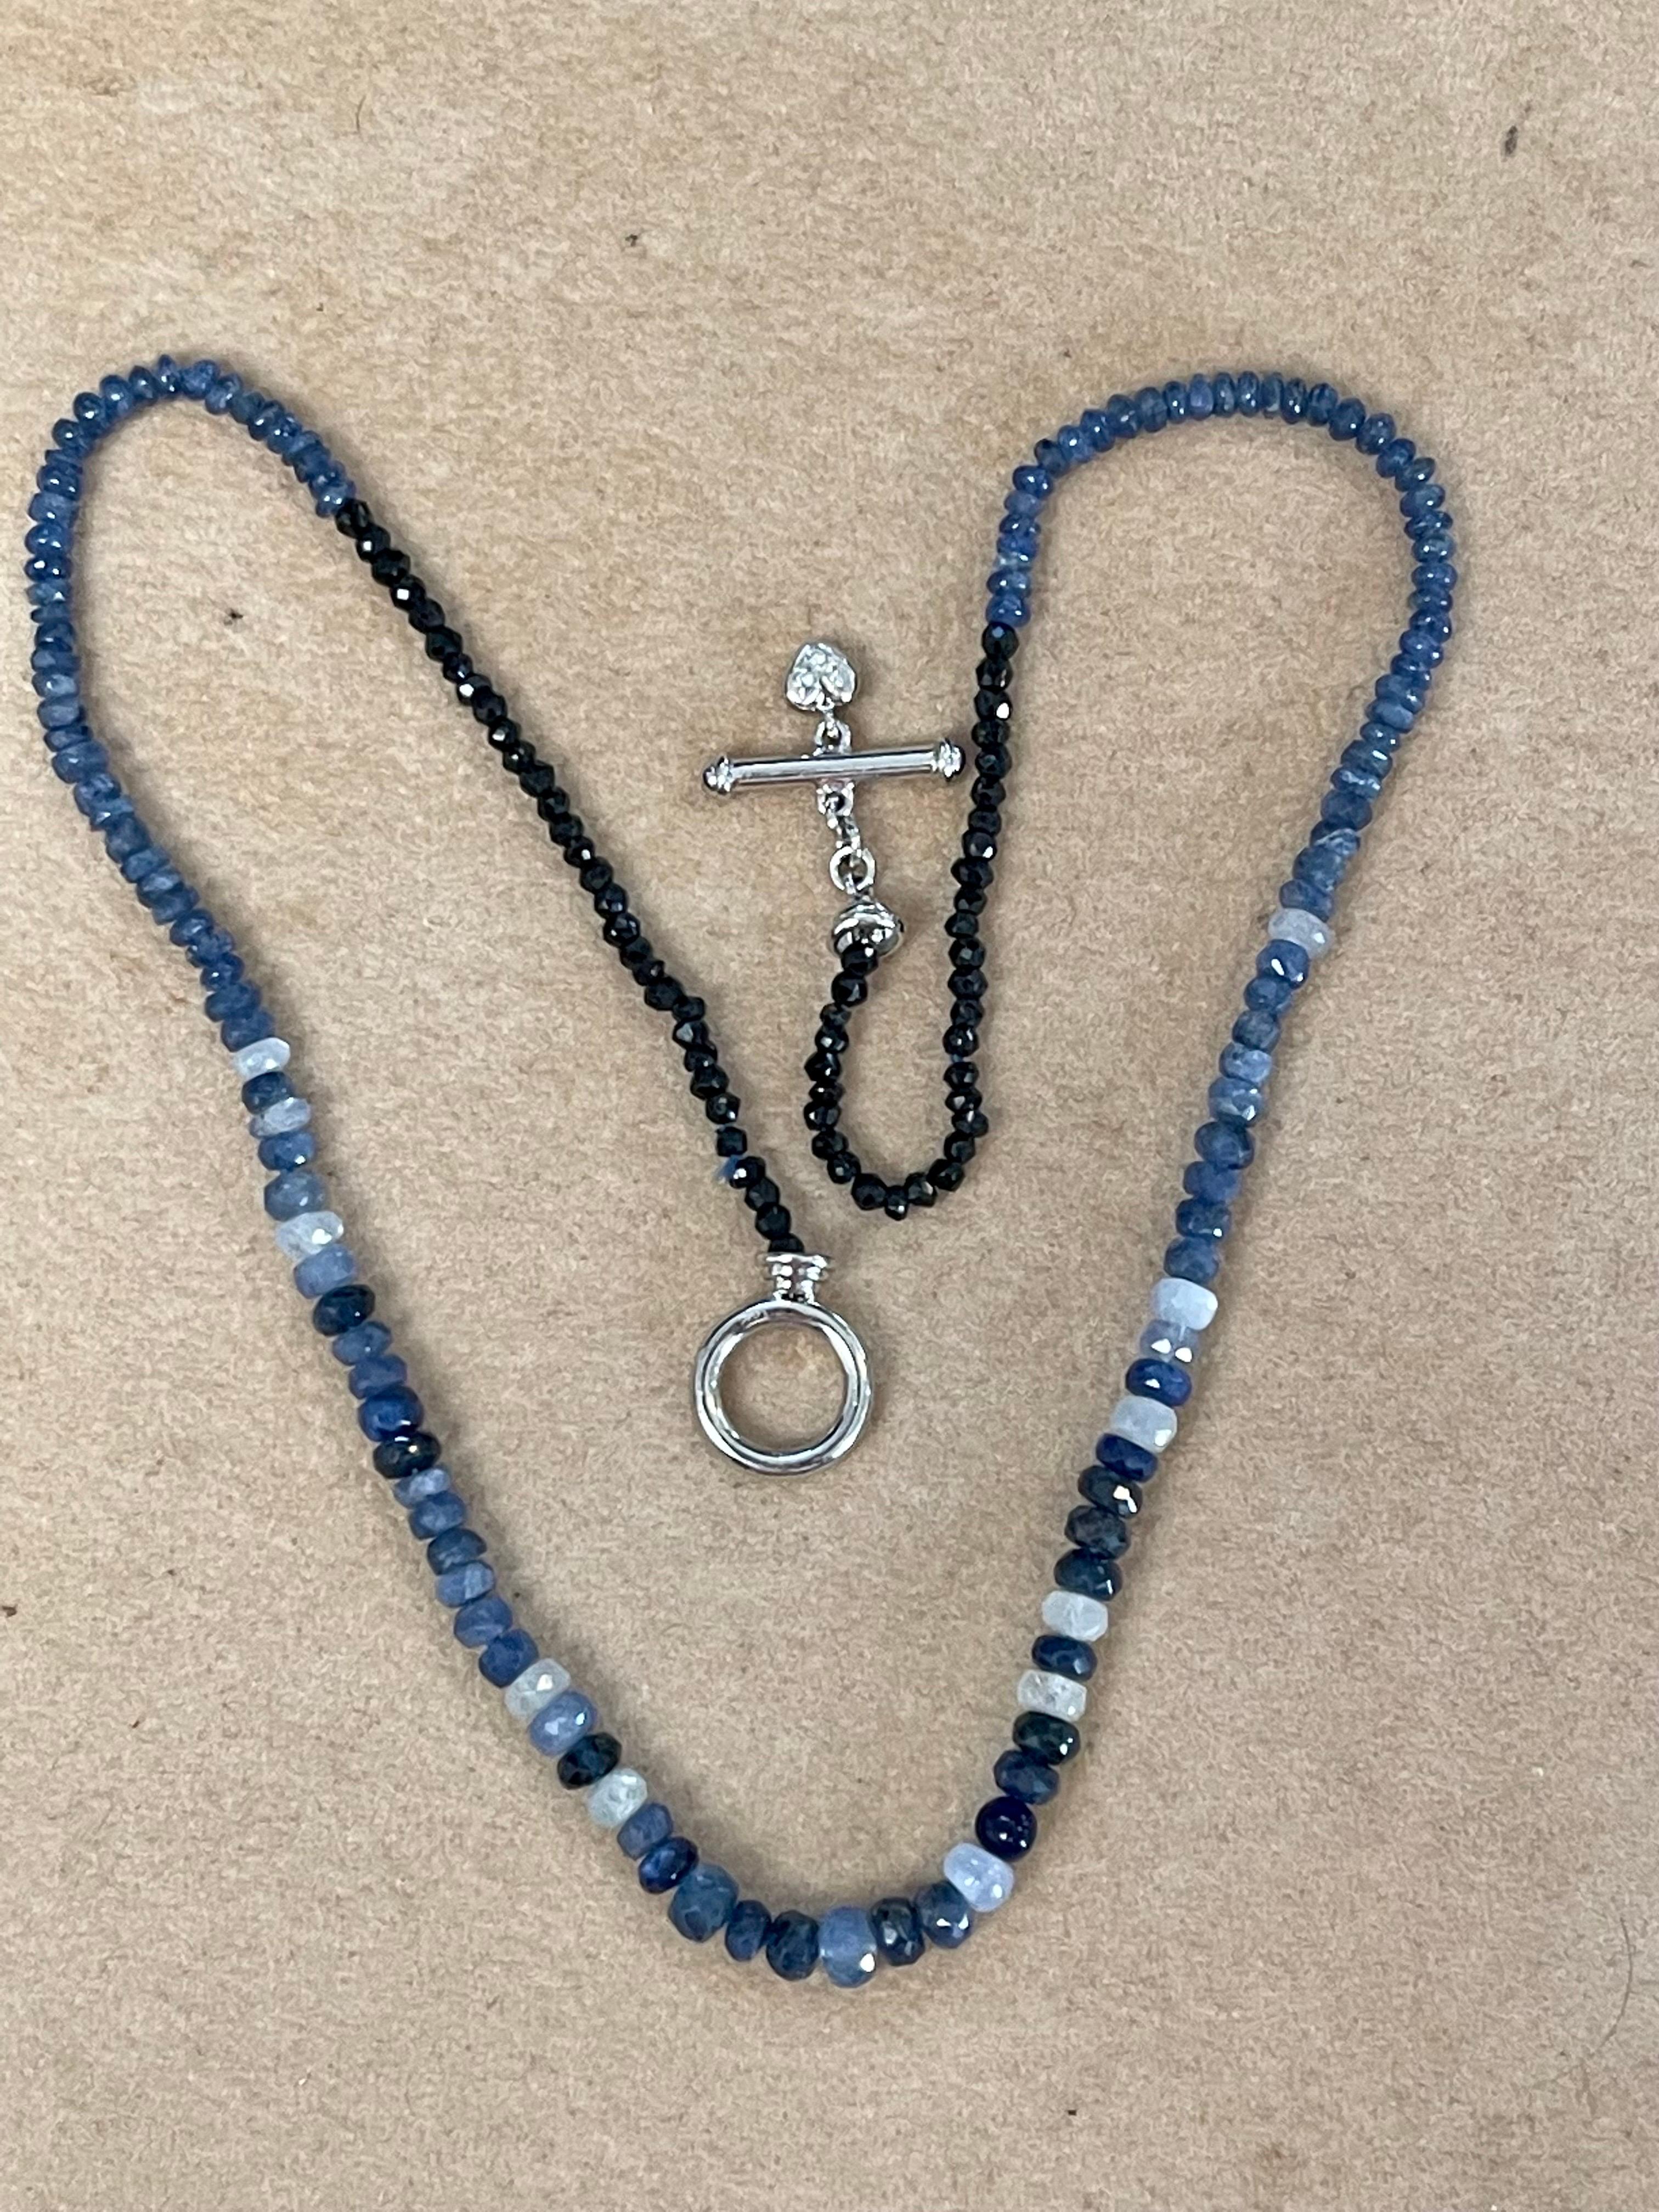 Approximately 50 Carat Natural Sapphire Bead Single Strand Necklace with Diamond in 14 KW Gold
All natural beads , no color enhancement
16